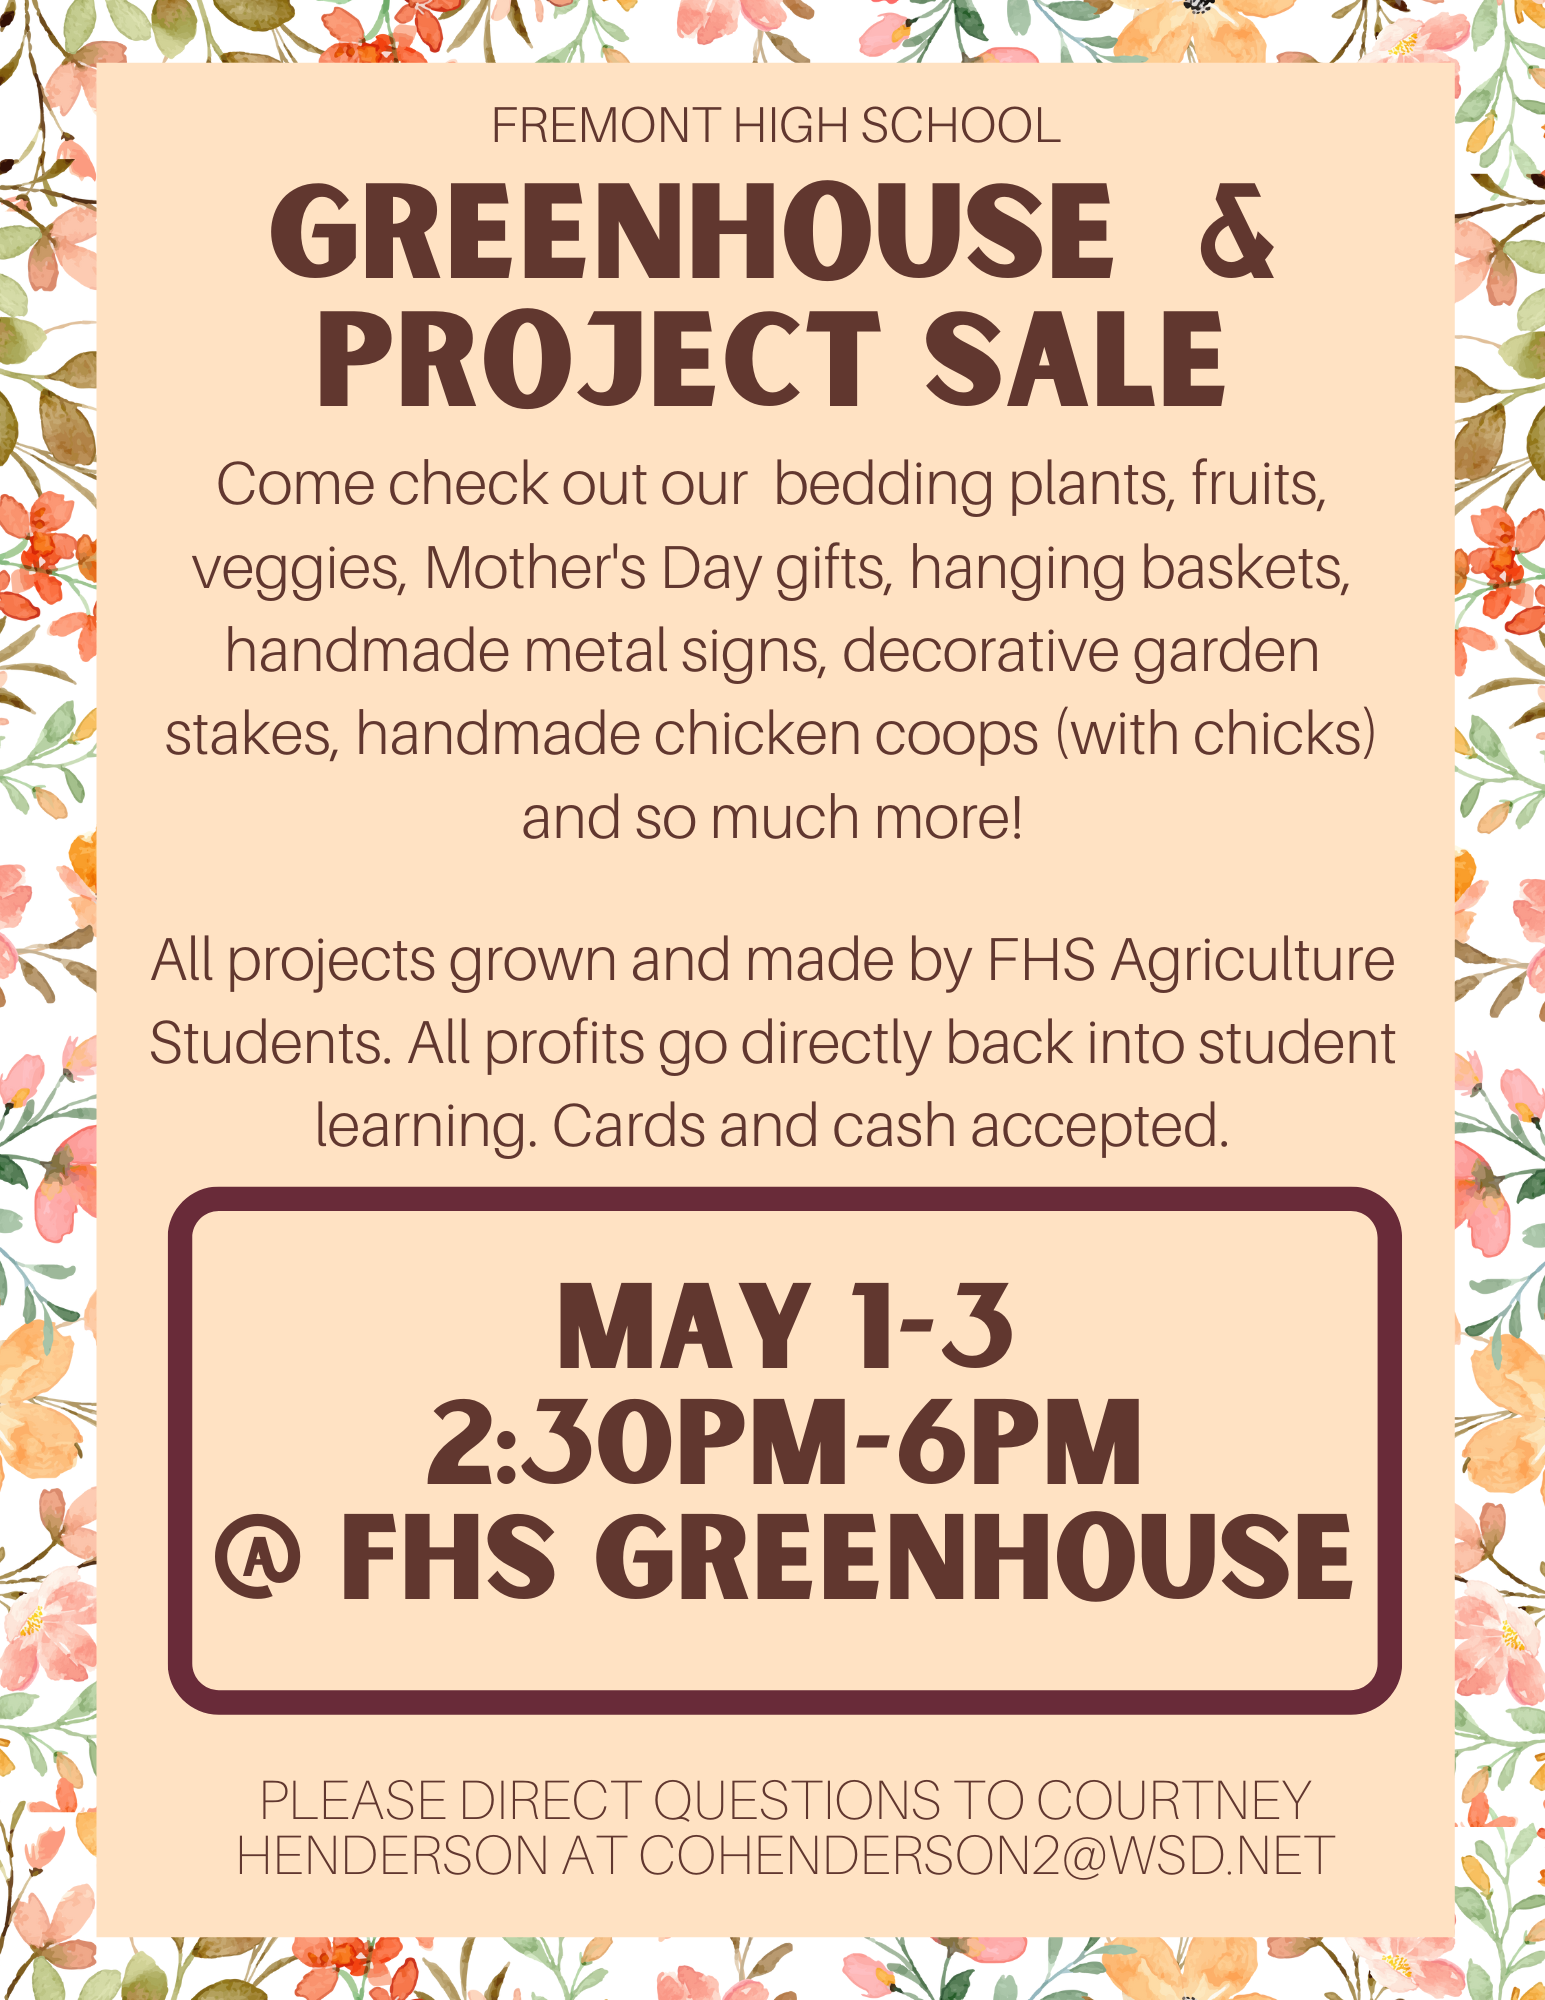 Greenhouse Sale, May 1 - 3 2:30pm - 6pm at FHS greenhouse